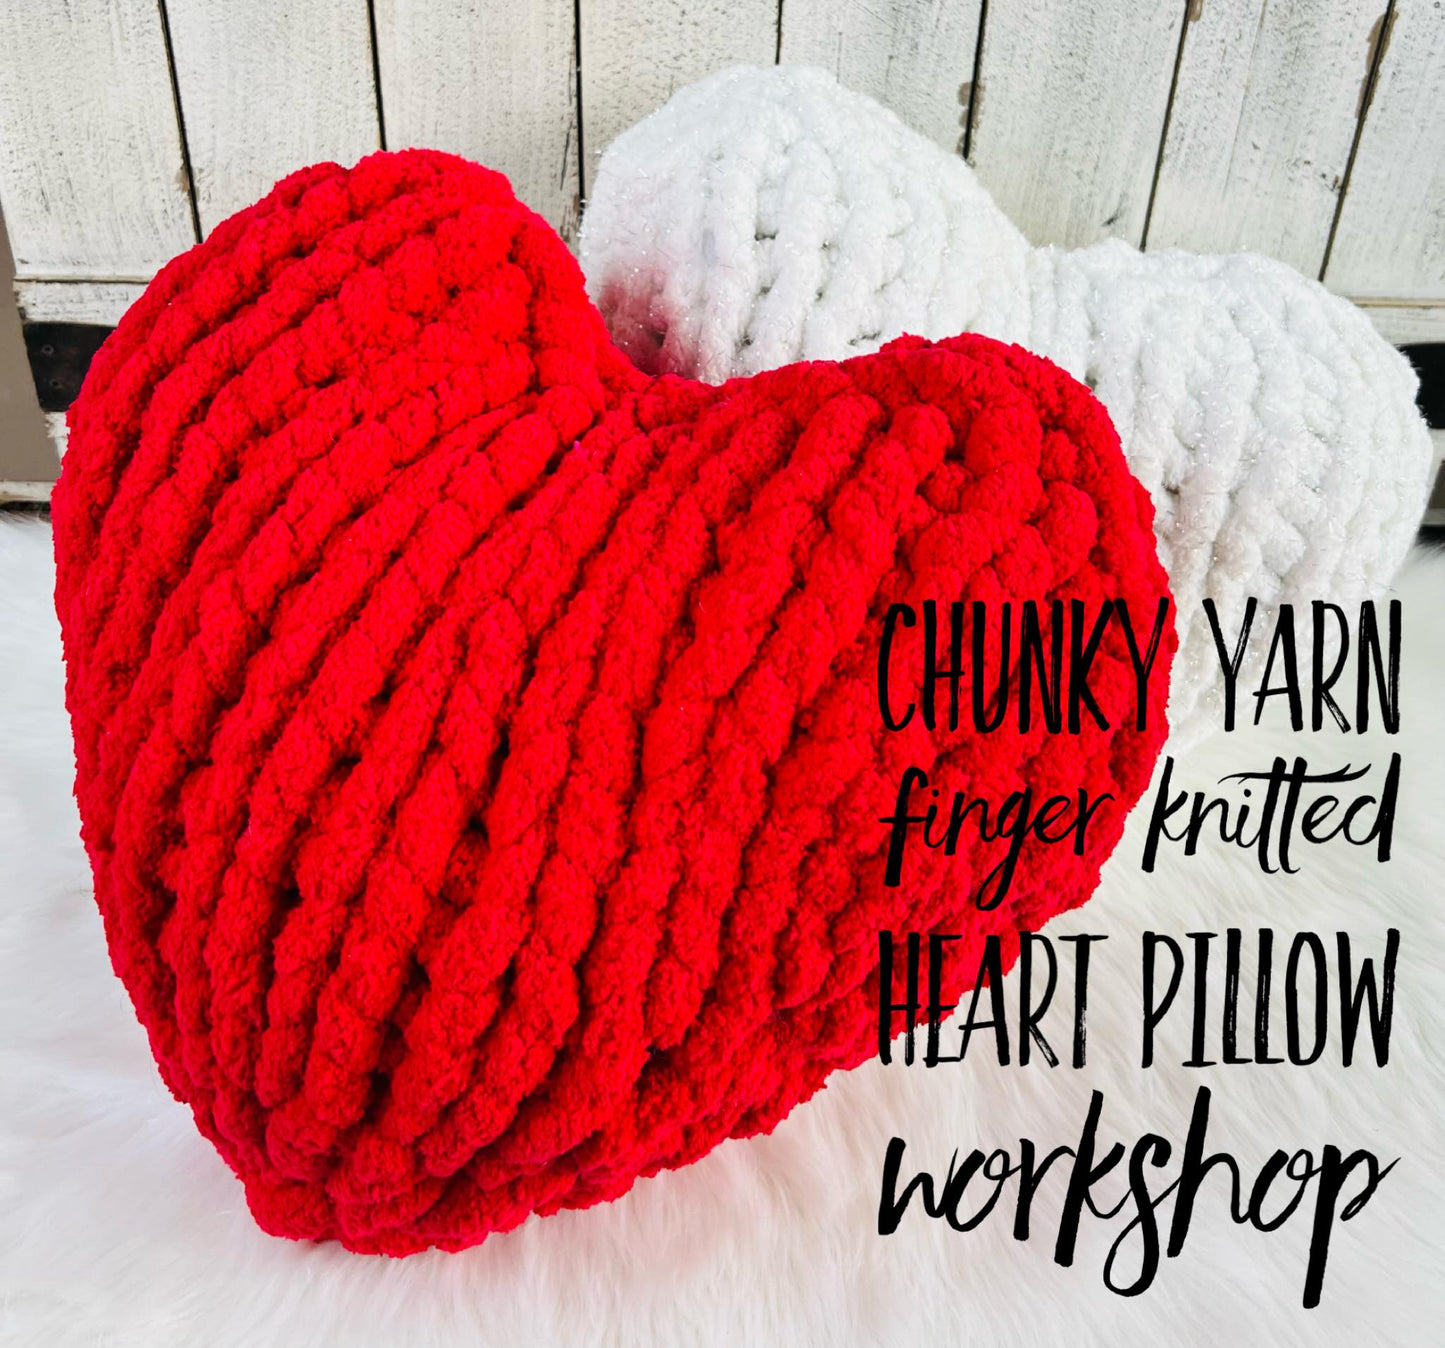 Chunky Yarn Finger Knitted Heart Pillow 01/21 2pm